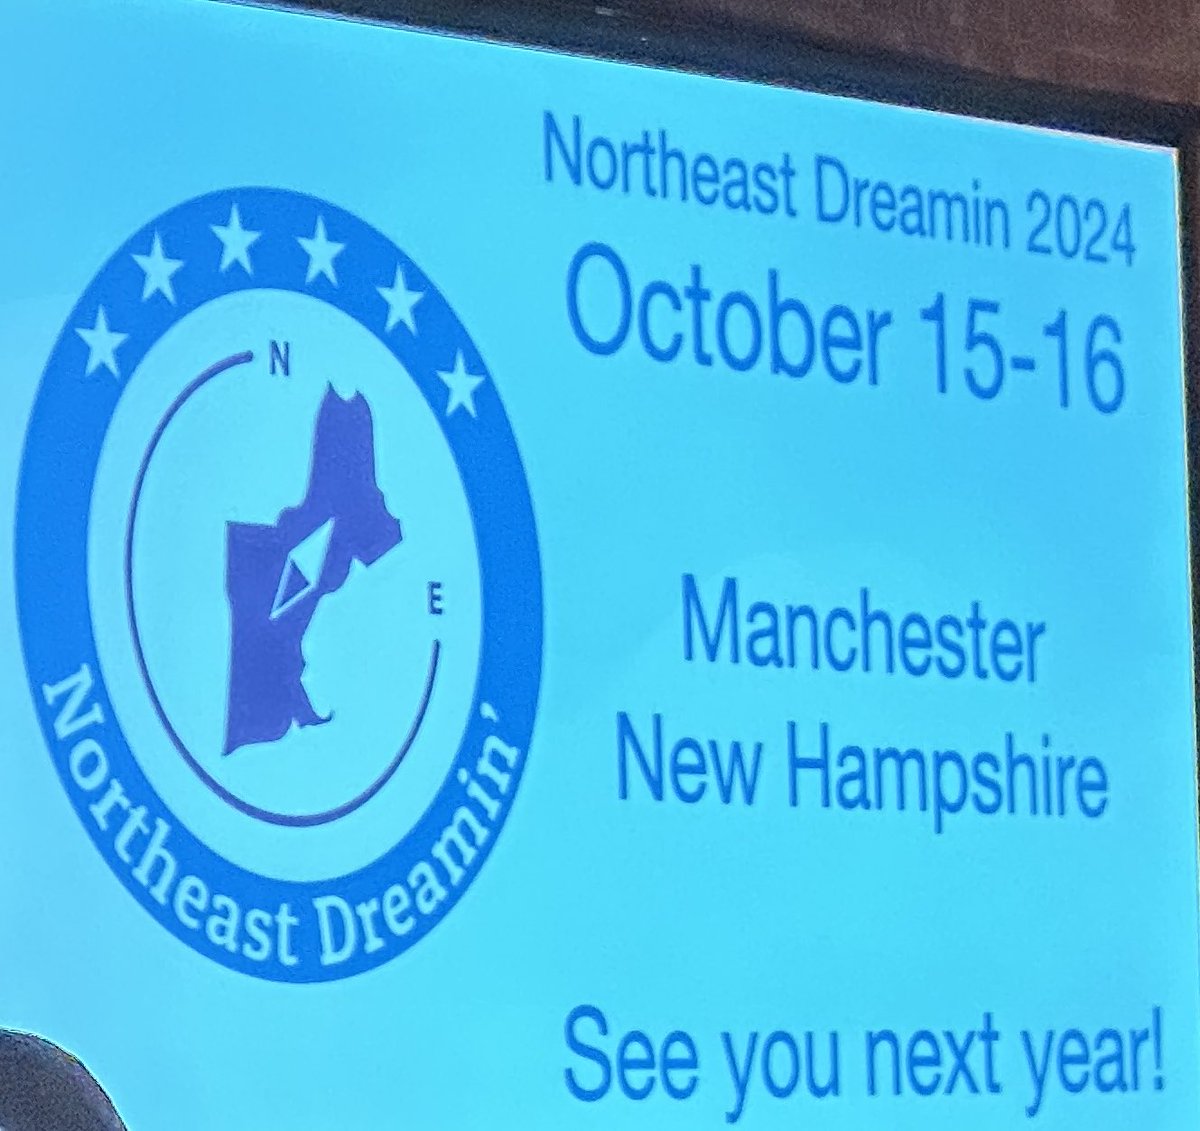 ⁦@NEDreamin⁩ 2023 was absolutely incredible with a wonderful organizing committee, speakers, sponsors, and volunteers‼️ Thank you NED for the opportunity to speak and volunteer too! 📣 NED 2024 is scheduled for October 15-16, 2024!